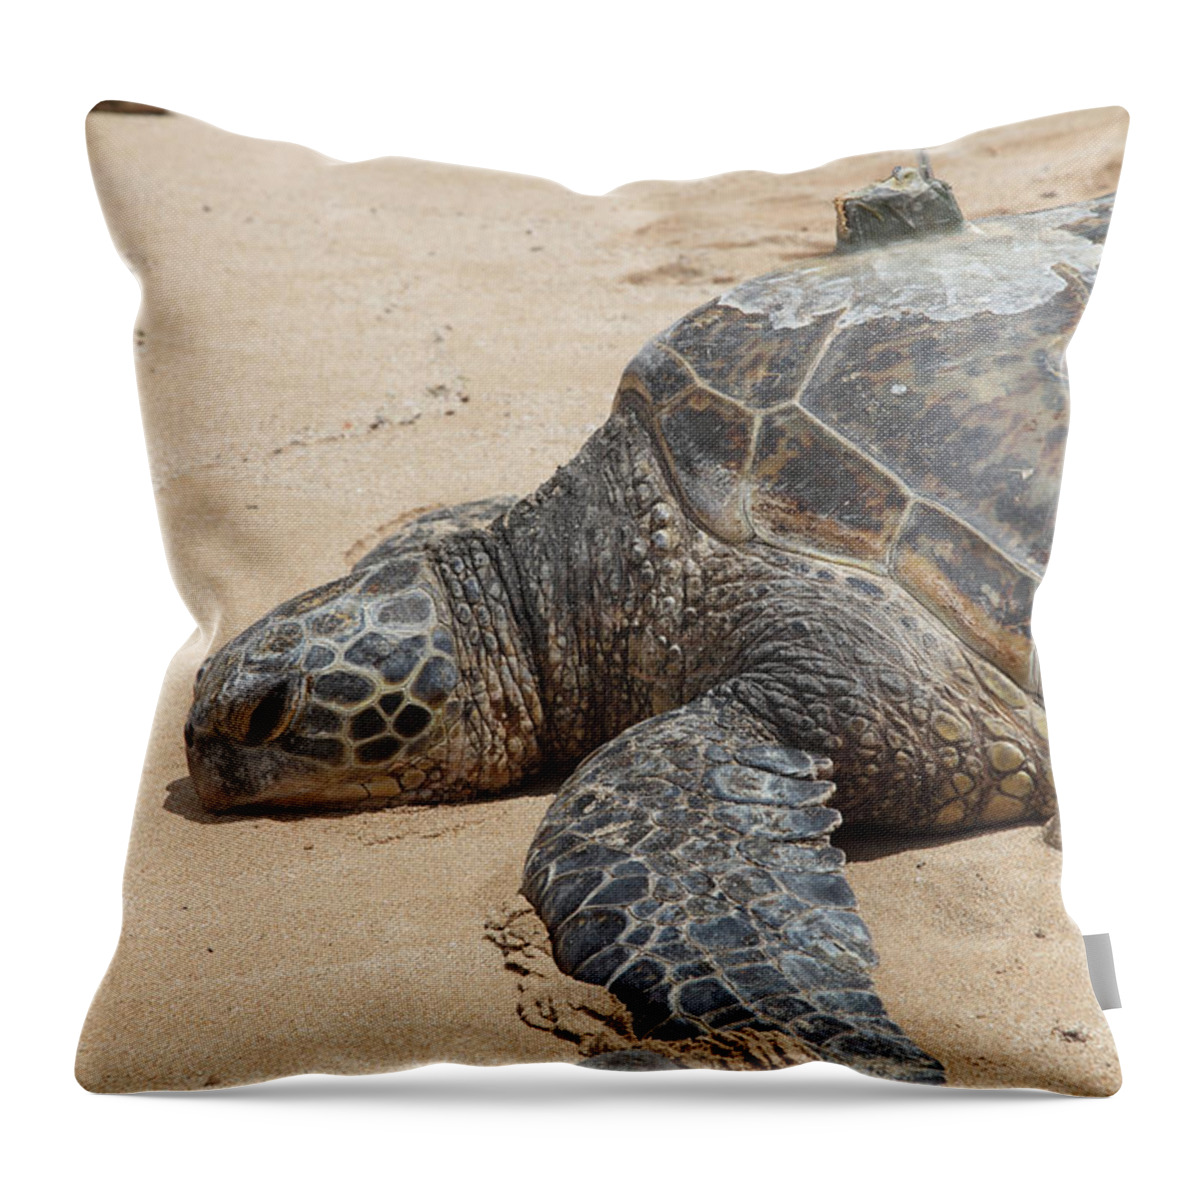 Green Sea Turtle Throw Pillow featuring the photograph Green Sea Turtle With Gps #2 by Ted Kinsman